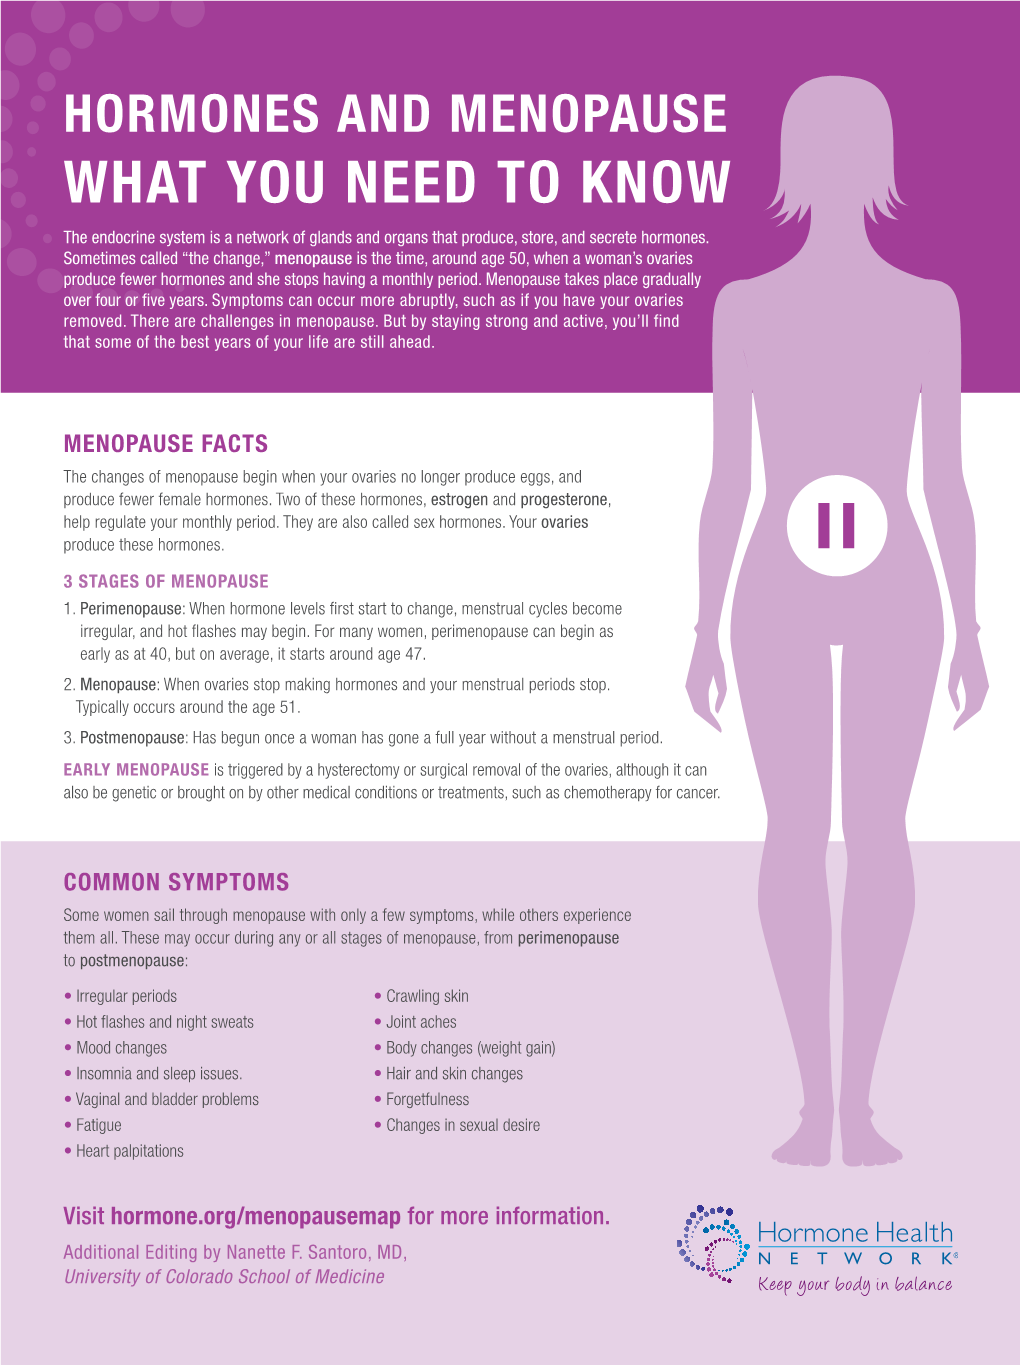 WHAT YOU NEED to KNOW the Endocrine System Is a Network of Glands and Organs That Produce, Store, and Secrete Hormones